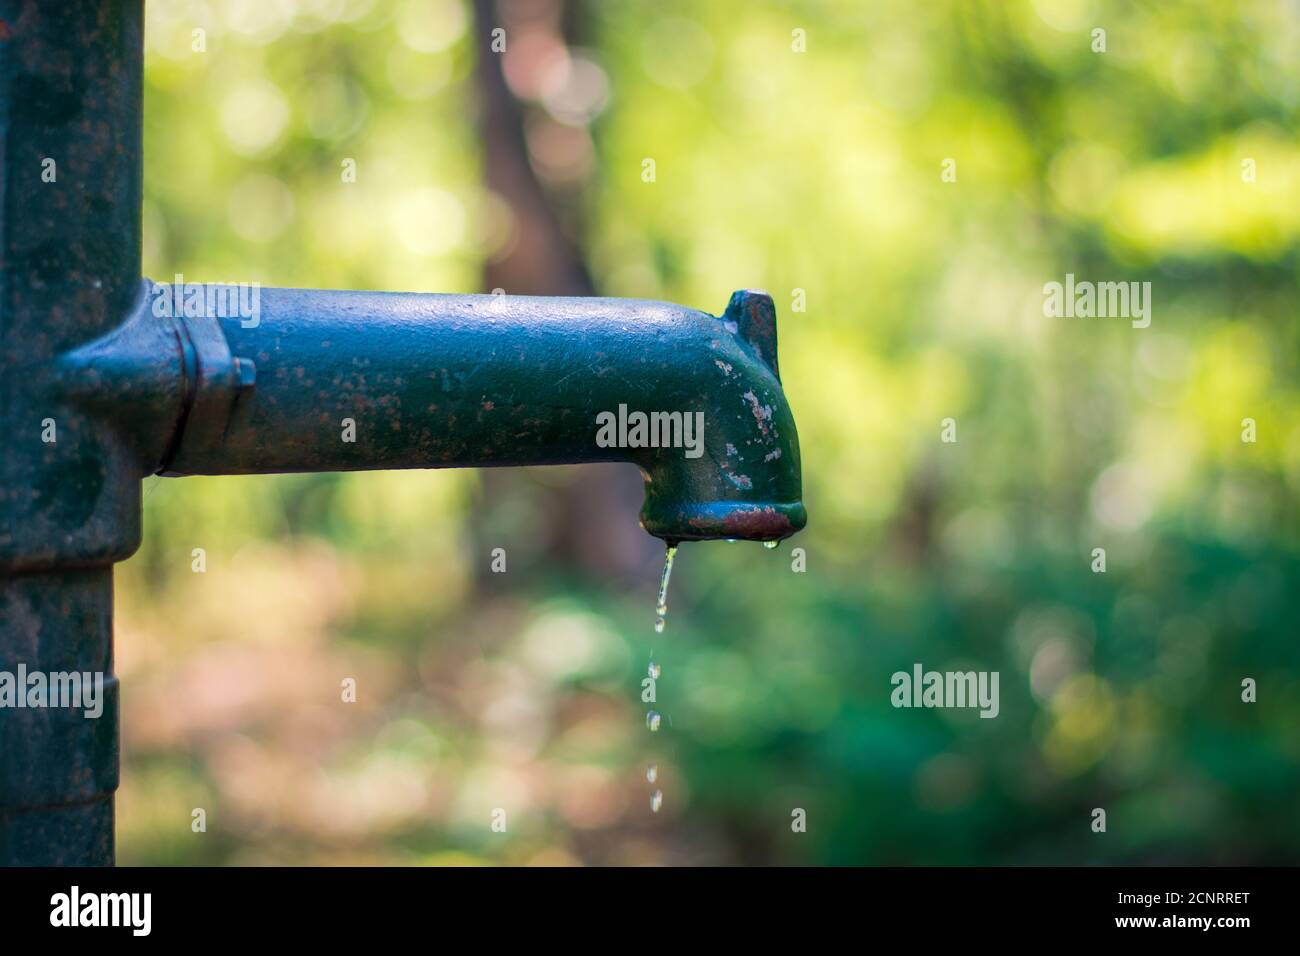 Manual old green and rusty water lever pump with water pouring out of the spout, last drop of water, drought. Blurred green background Stock Photo